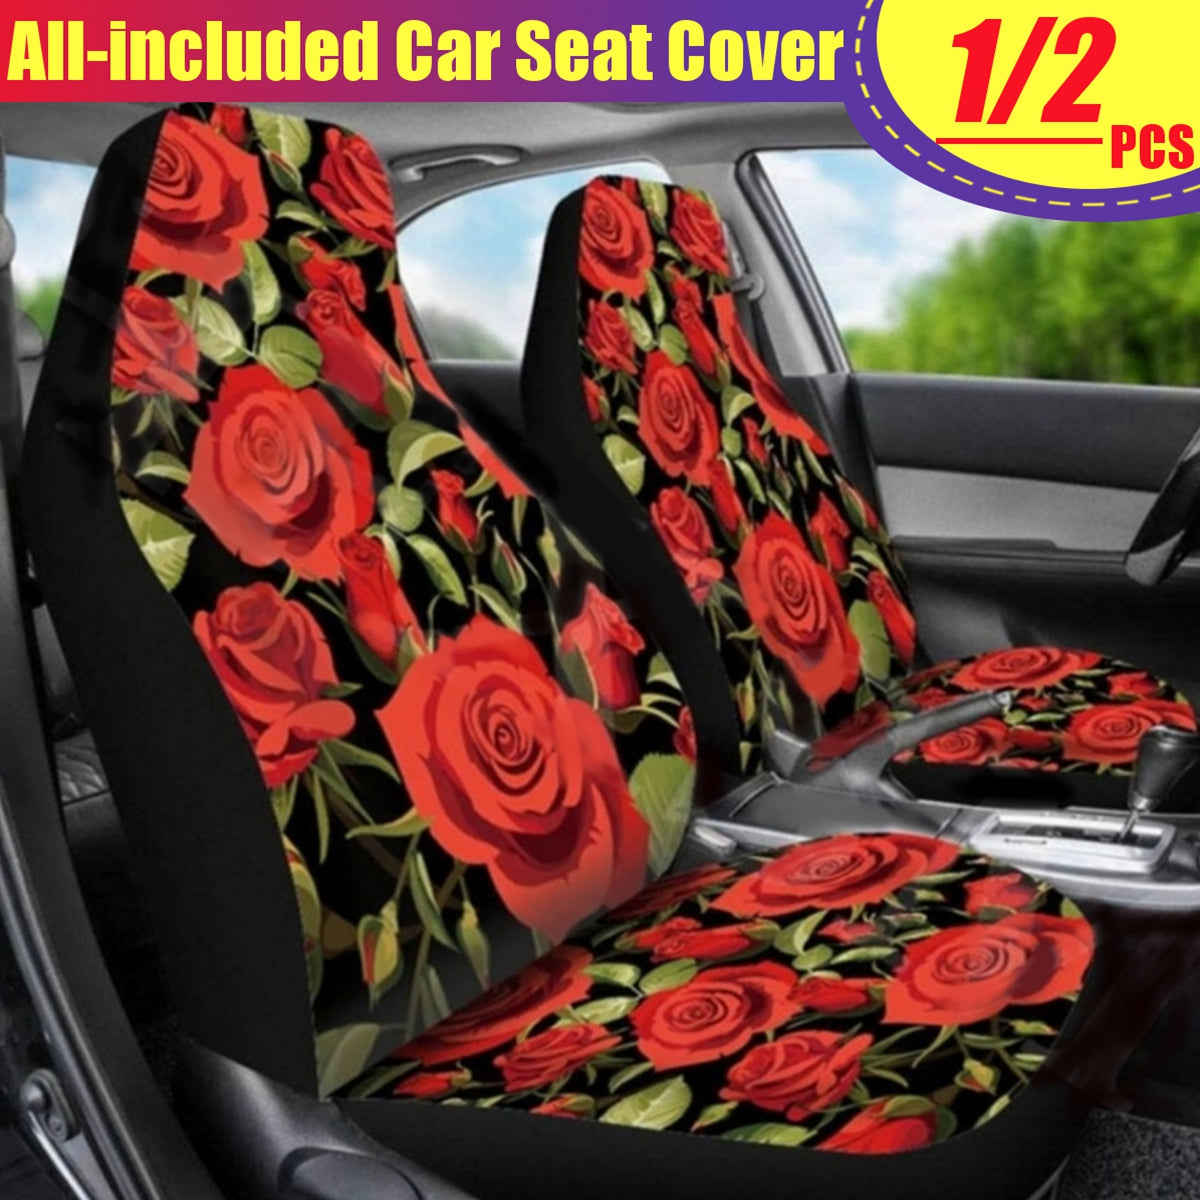 Universal Car Front Seat Cushion Cover Rose Printed Full Protector 1/2 PCS